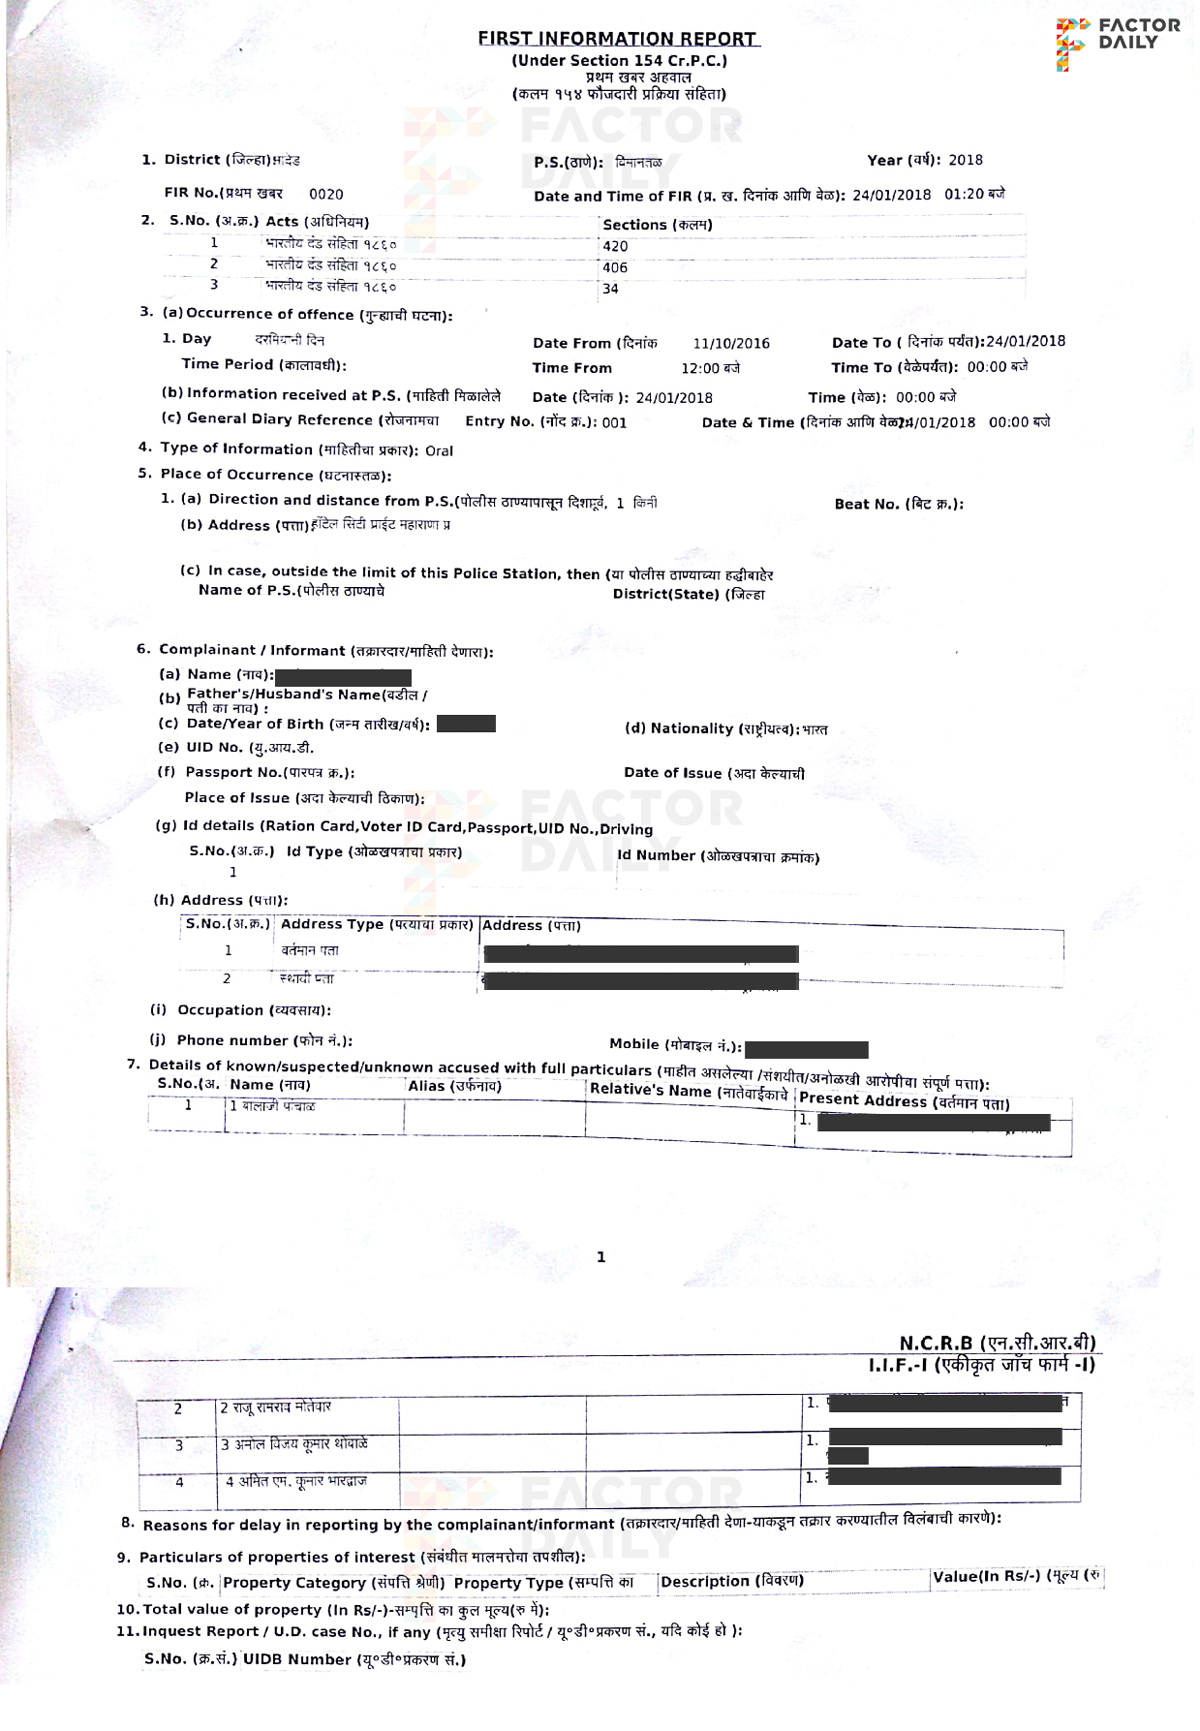 A copy of the FIR against Amit Bhardwaj filed in Maharashtra with some details redacted